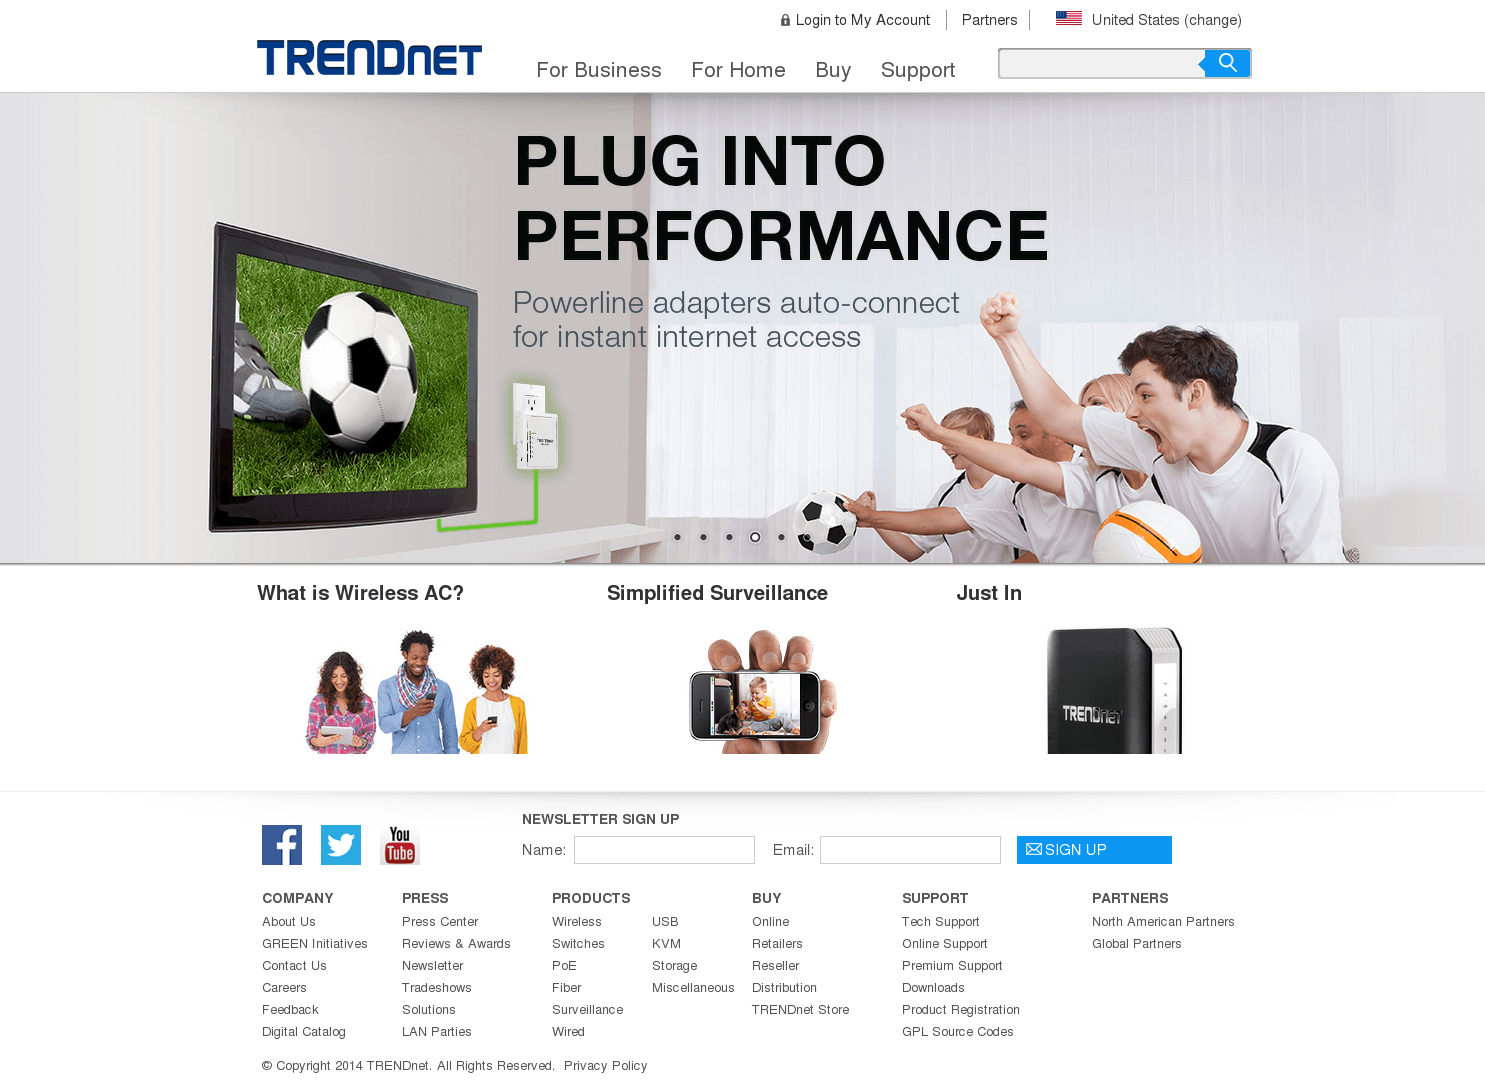 TRENDnet Logo - TRENDnet Competitors, Revenue and Employees - Owler Company Profile